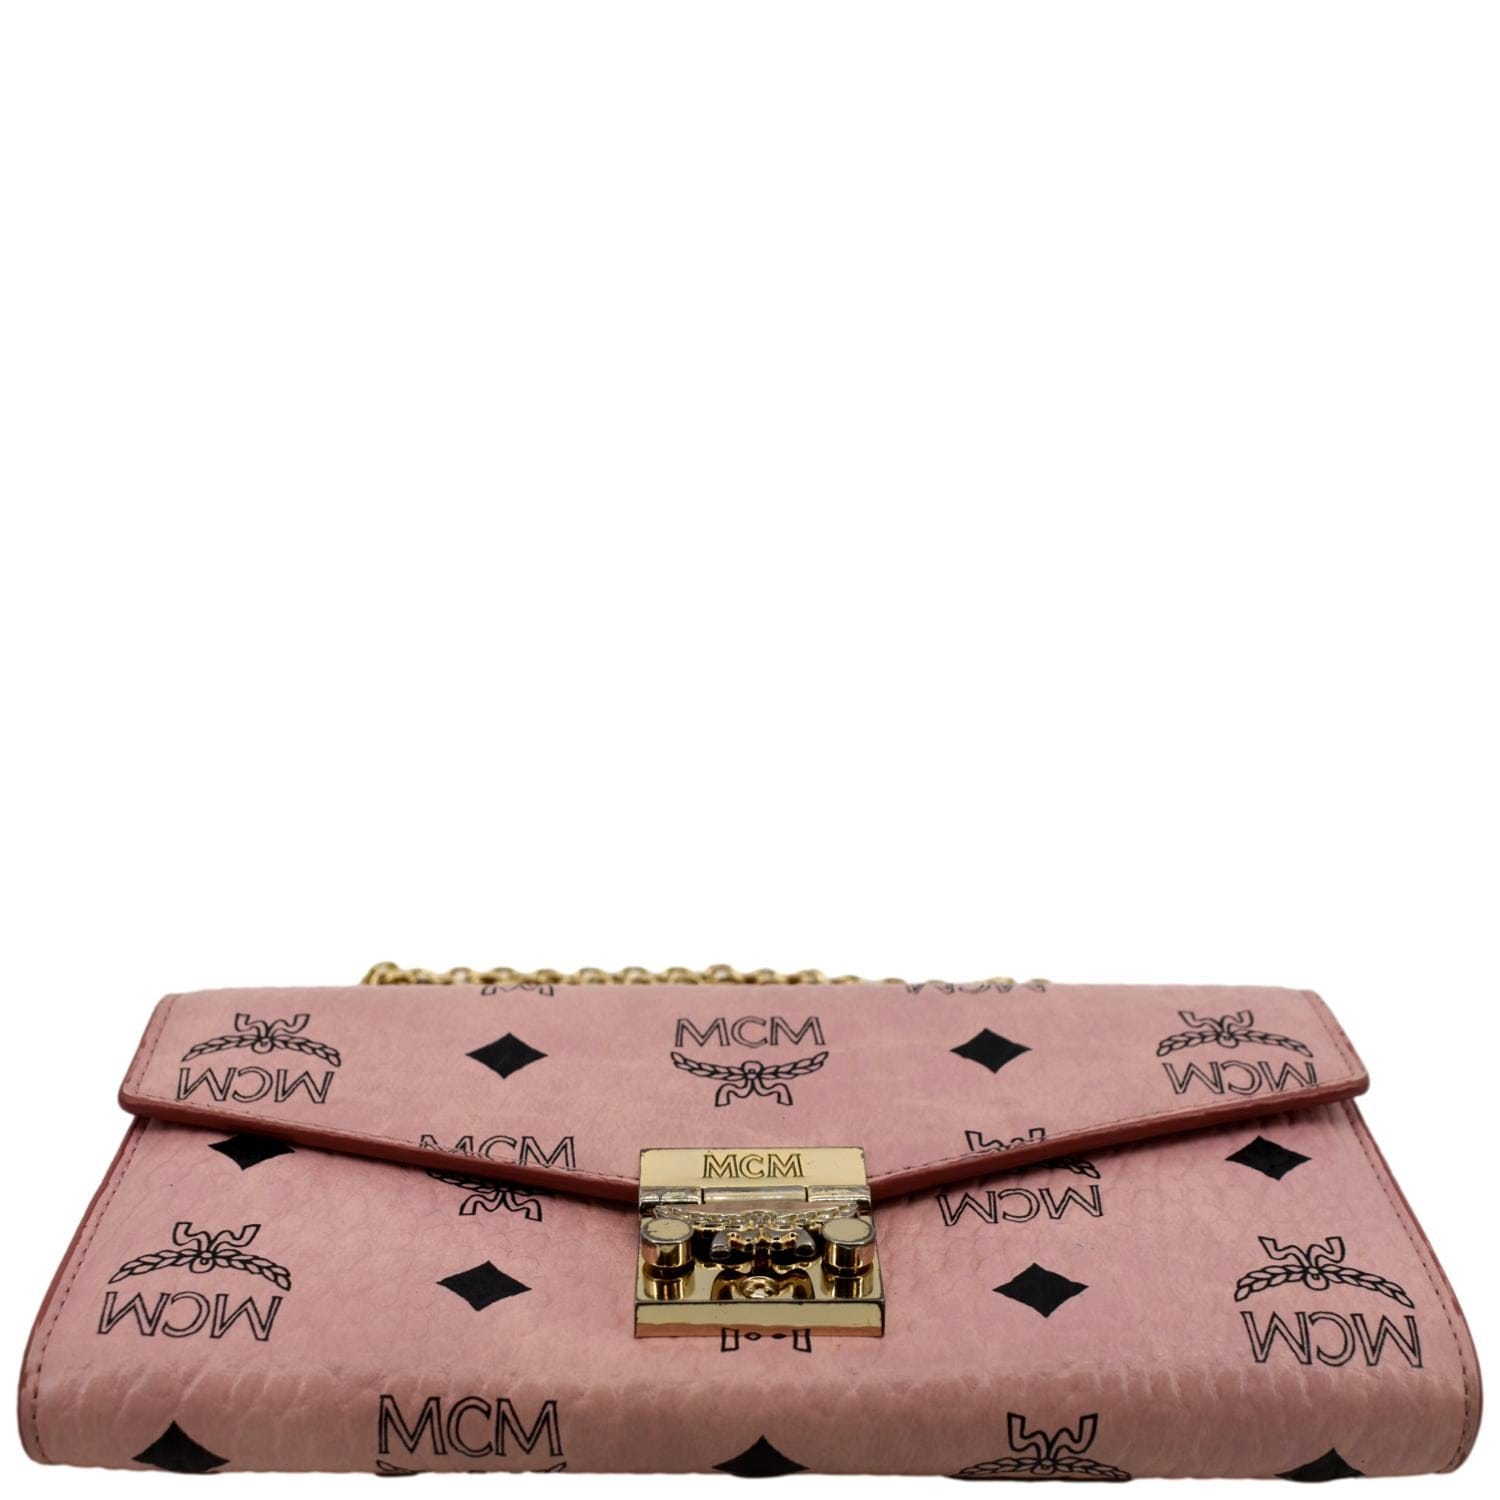 MCM Patricia Visetos Large Chain Wallet Review in Powder Pink!, Try - On